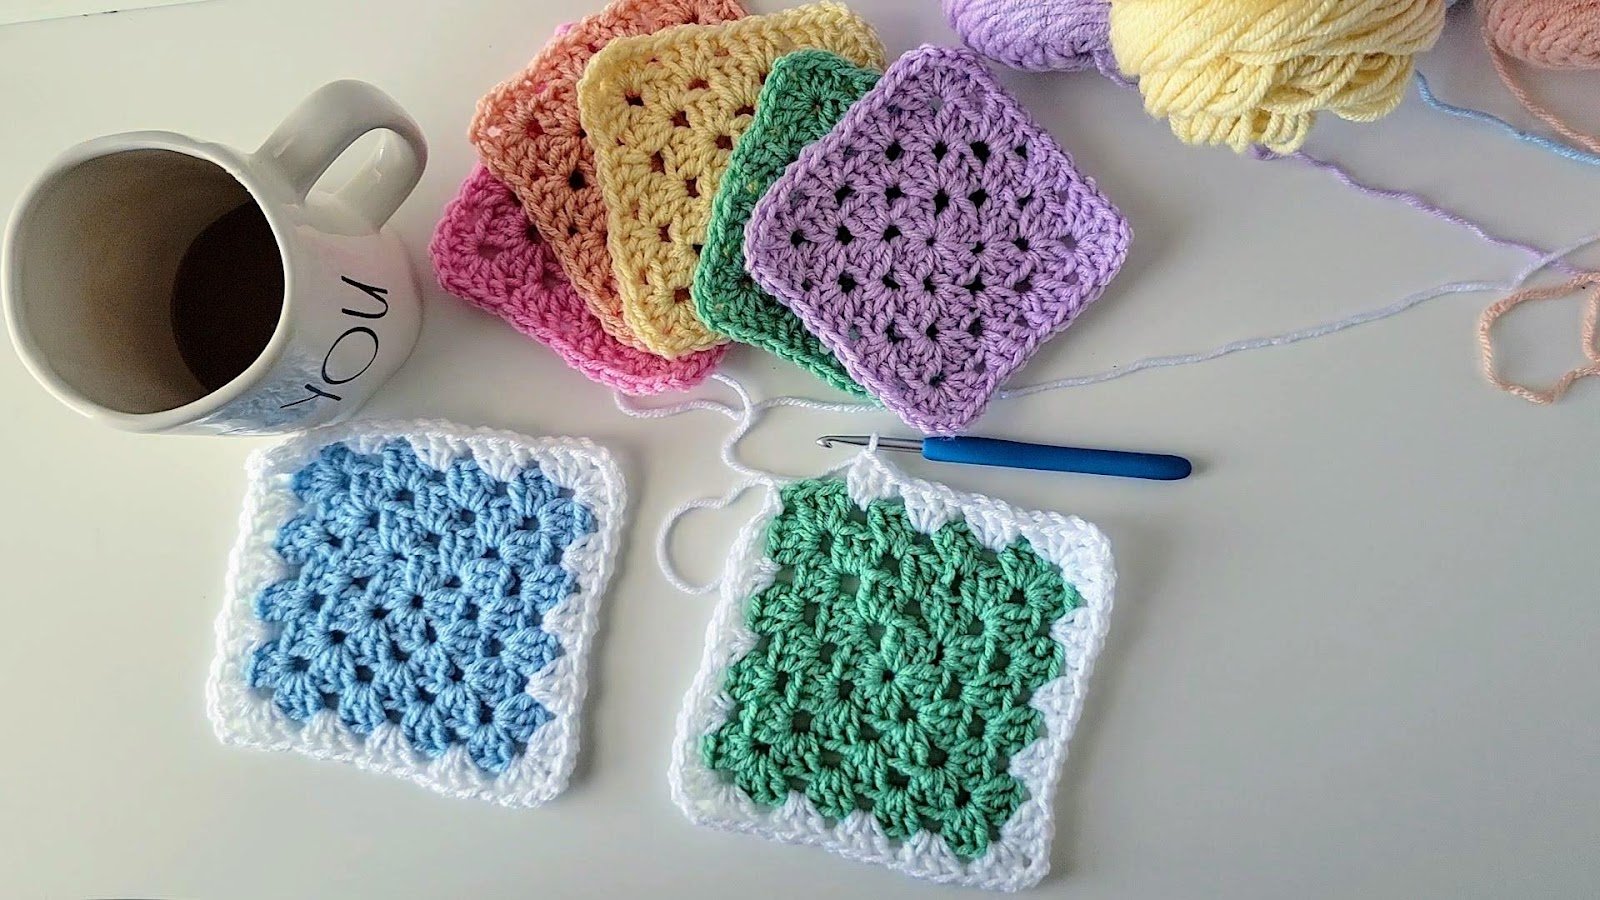 The Best Beginner Granny Square Step by Step Crochet Tutorial